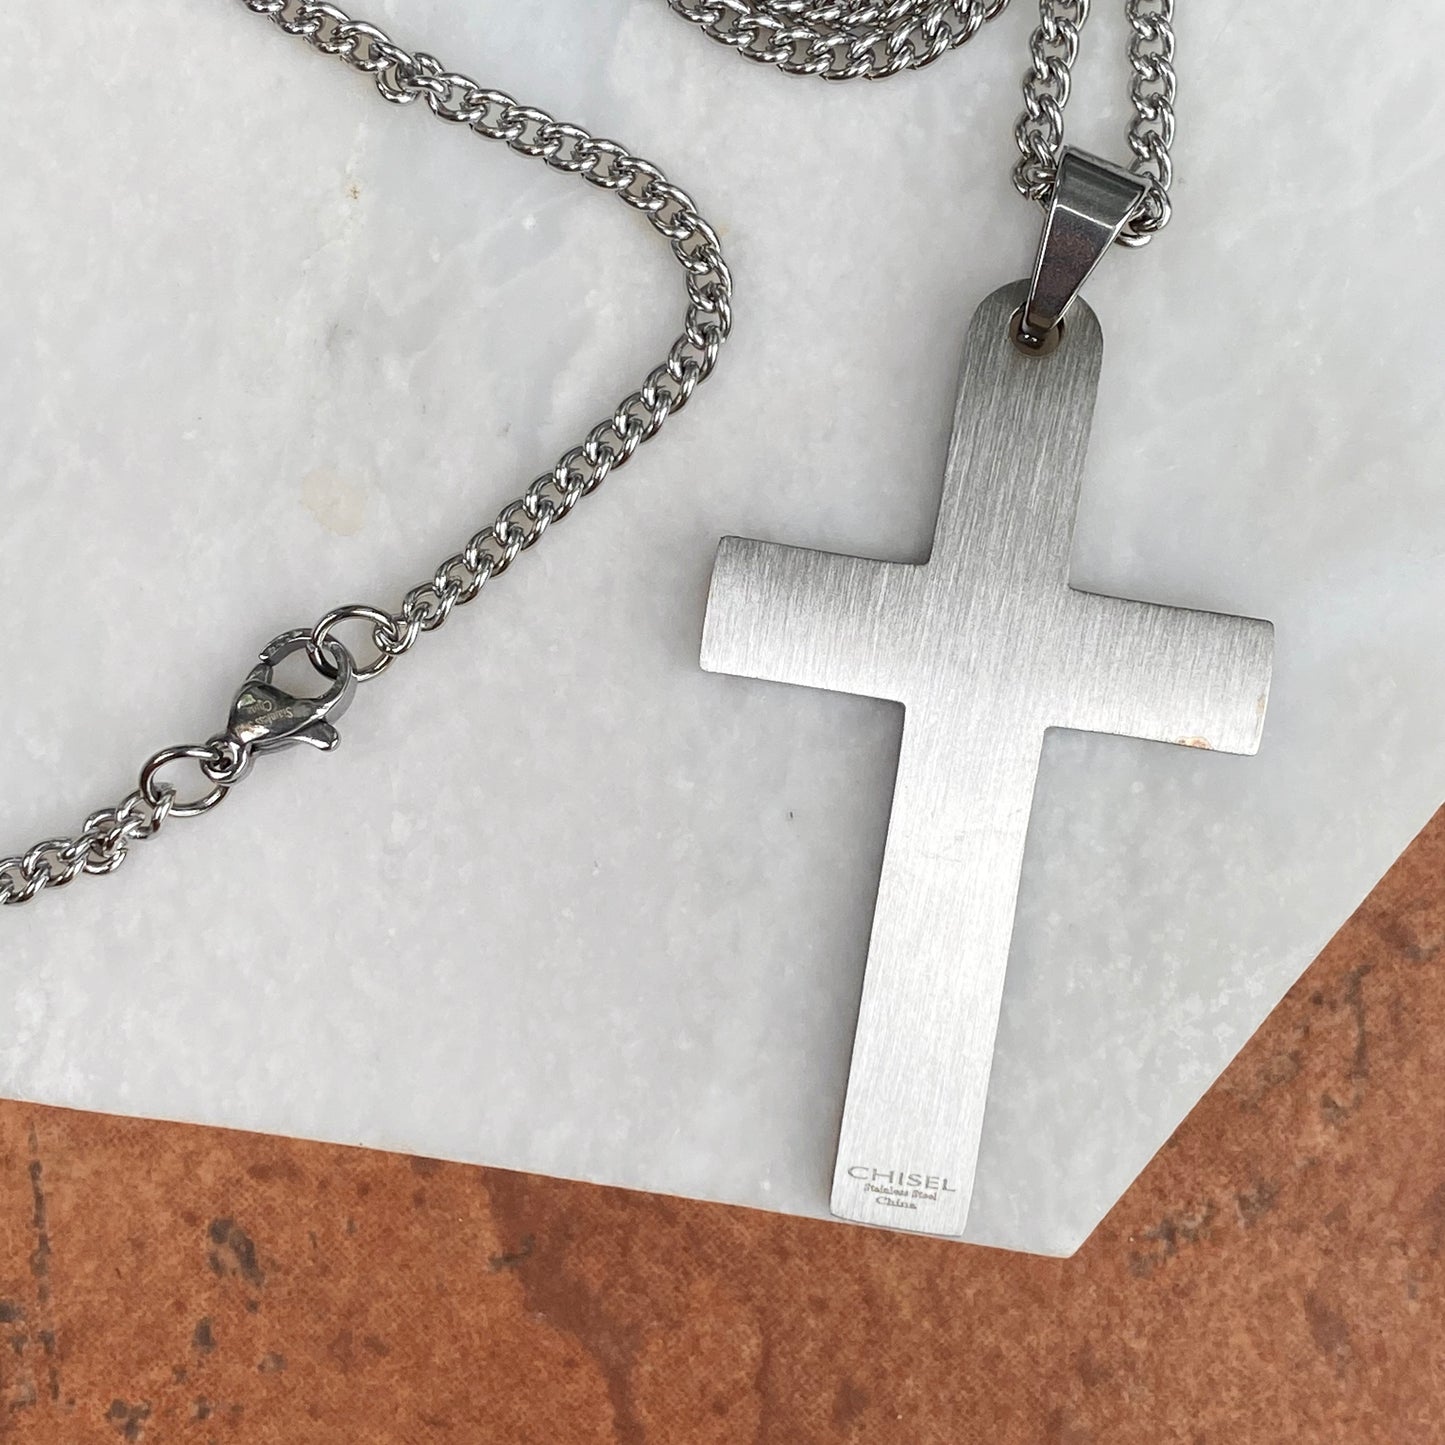 Stainless Steel Polished The Lord's Prayer Large Cross Chain Necklace, Stainless Steel Polished The Lord's Prayer Large Cross Chain Necklace - Legacy Saint Jewelry